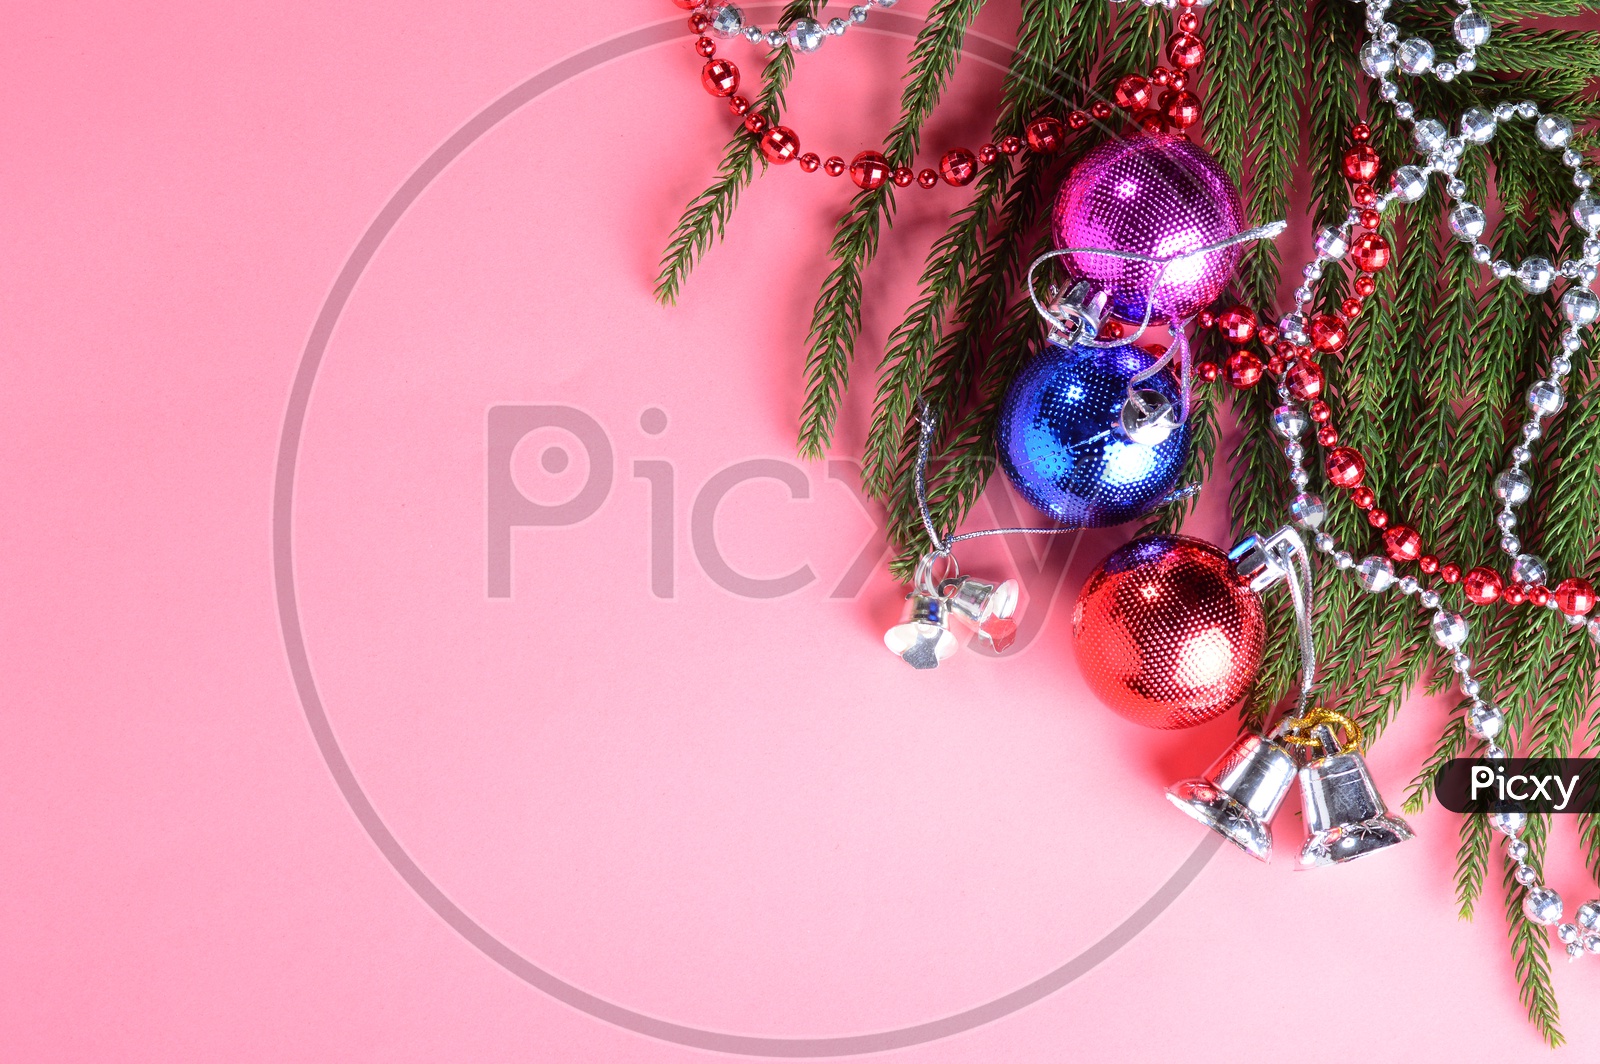 Christmas Greeting Template With Spacing And With Christmas Balls And Tree Decoration Background